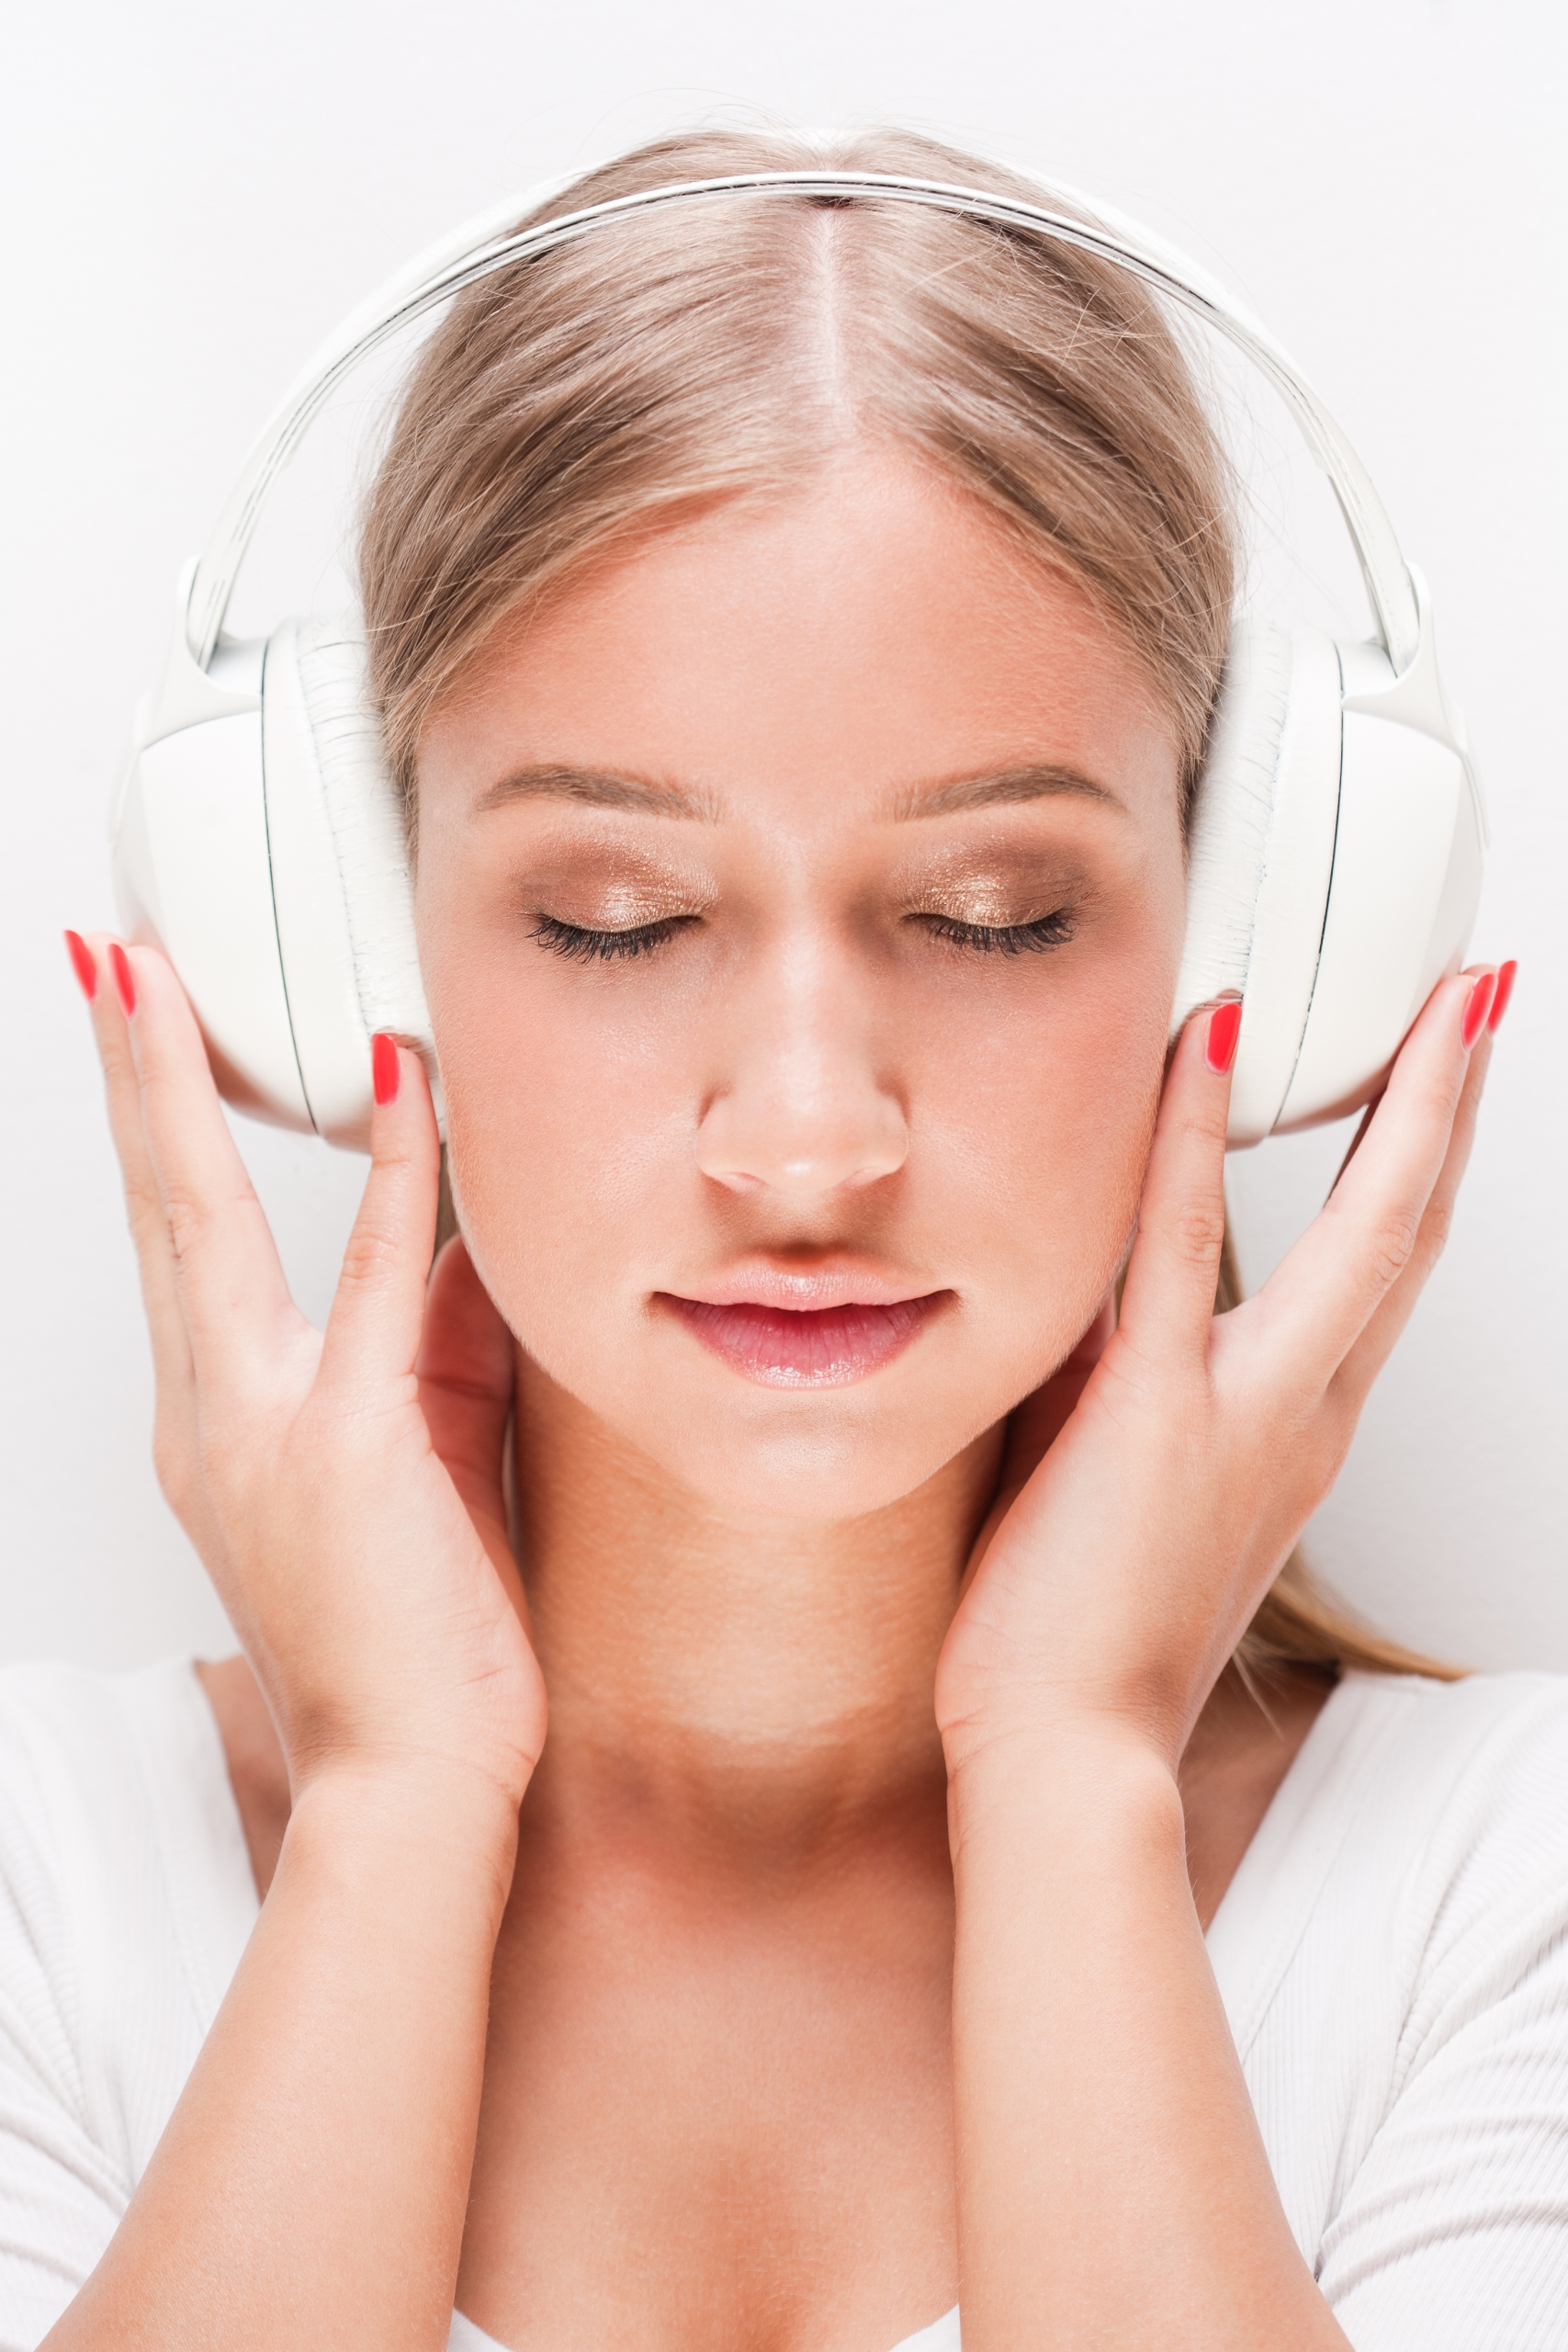 A person listening to calming music from their headphones.